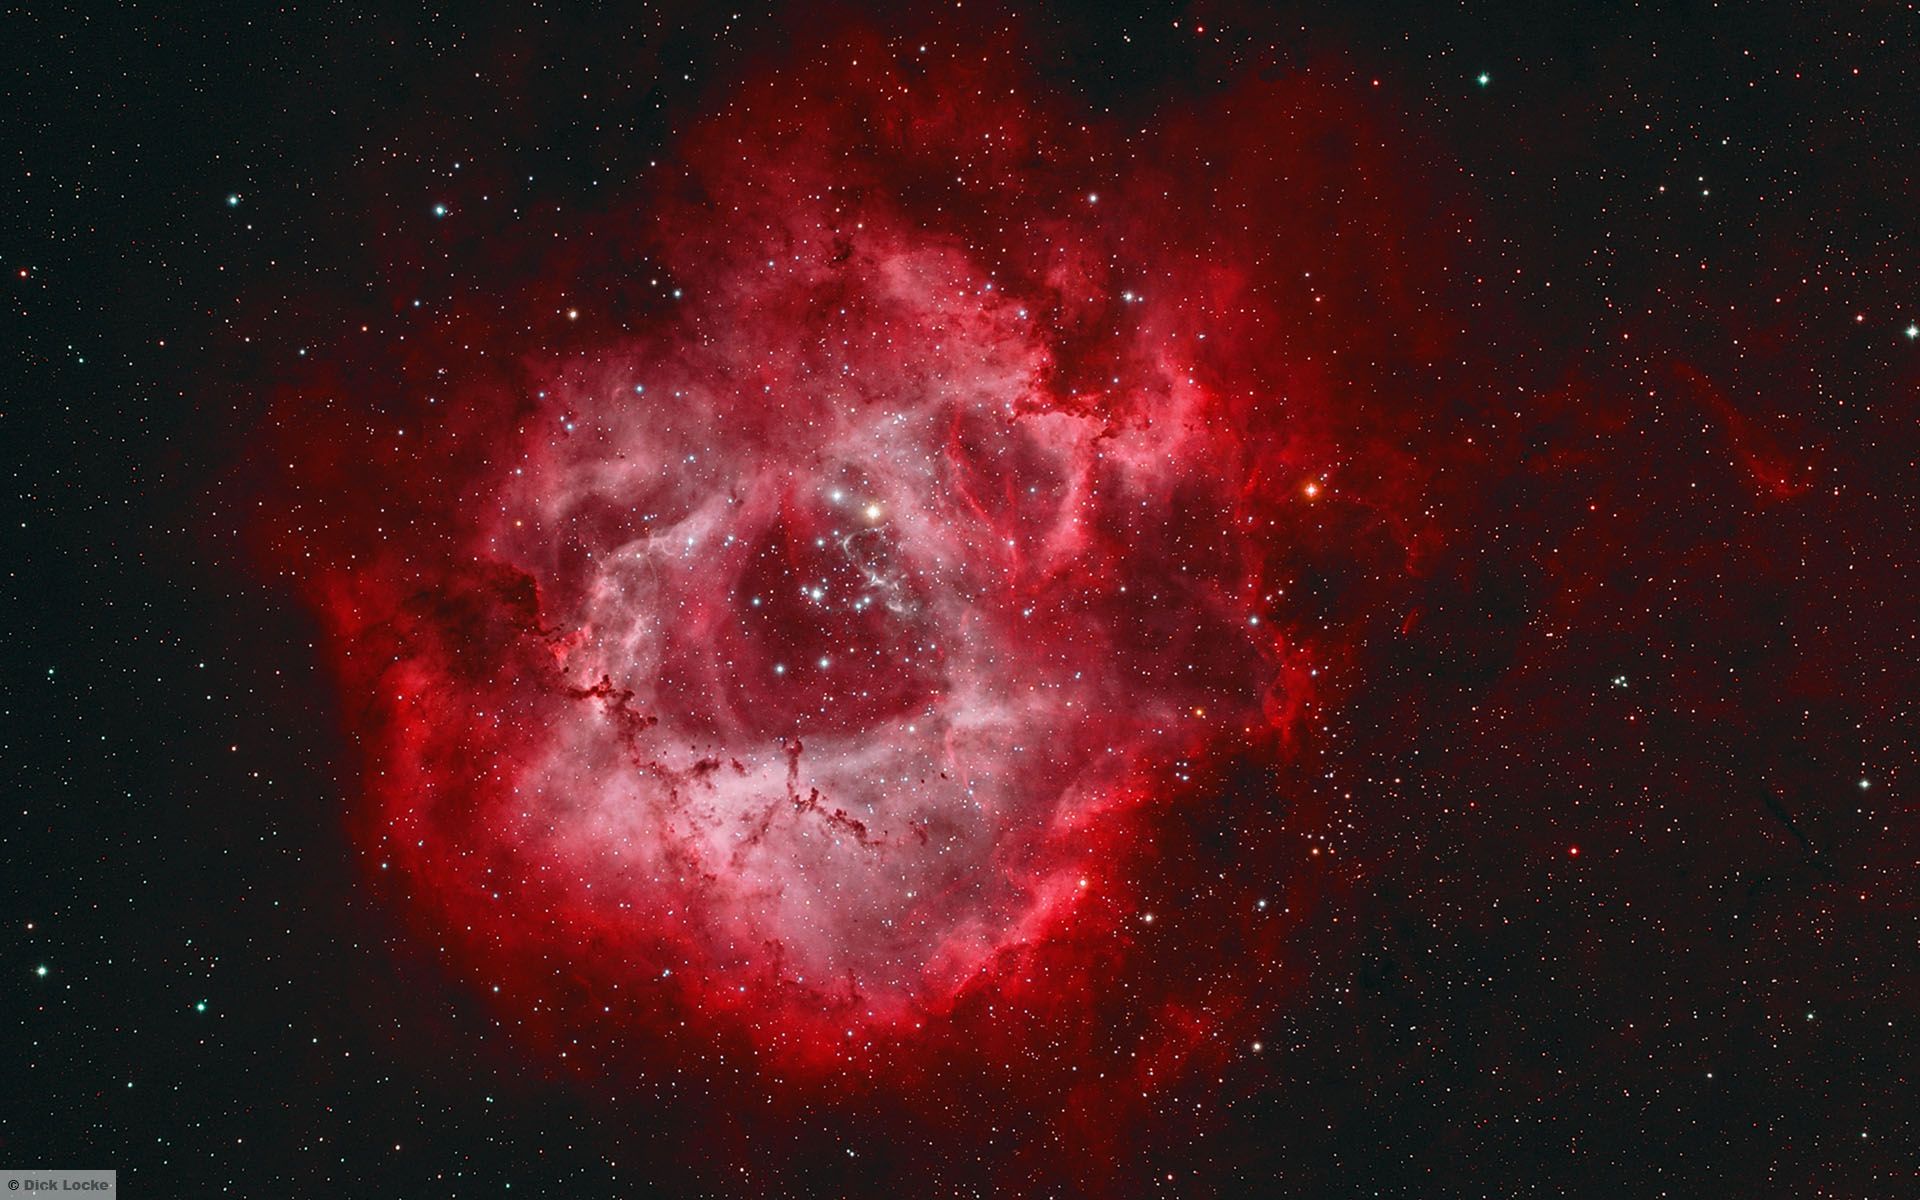 Rosette Nebula Picture: Astrophotography Image